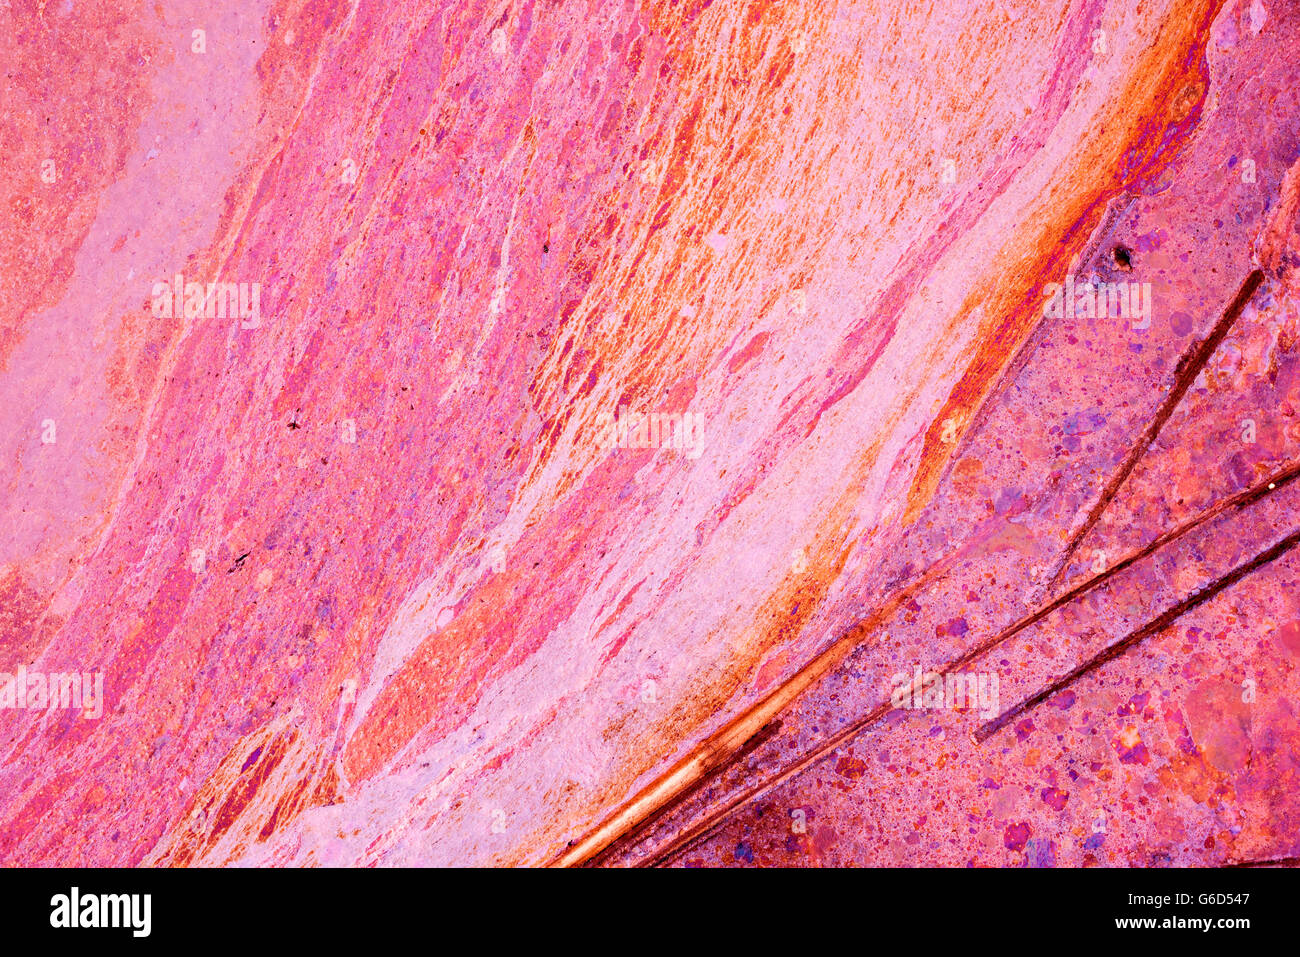 Colorful liquid paint spill background in high contrast pink rainbow colors, abstract texture art backdrop. Stock Photo